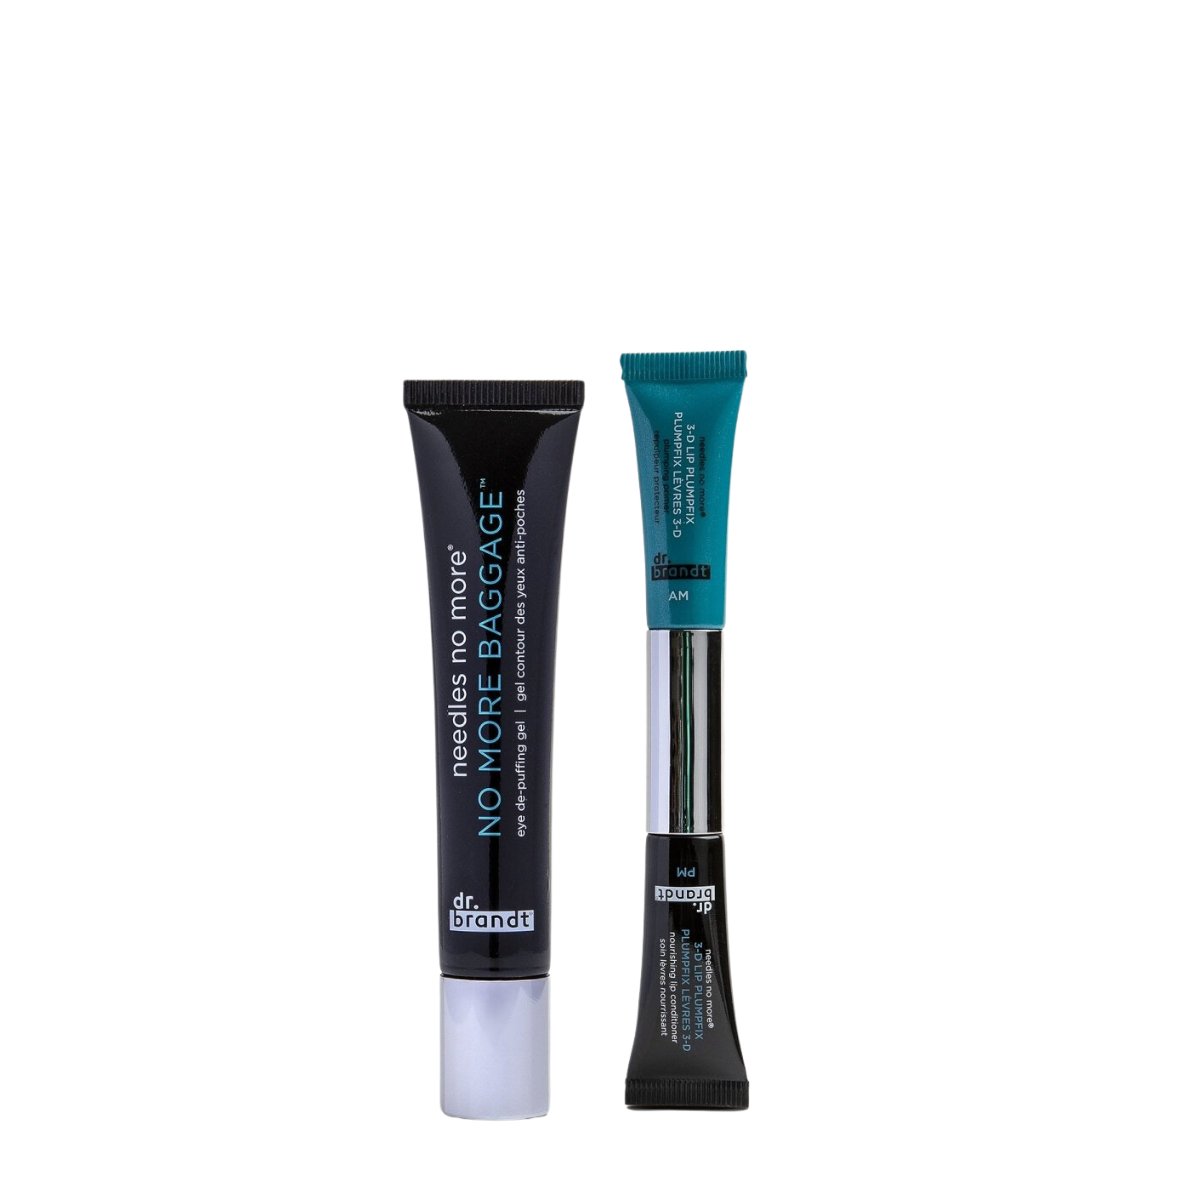 Dr. Brandt's Eye and Lip Duo - SkincareEssentials